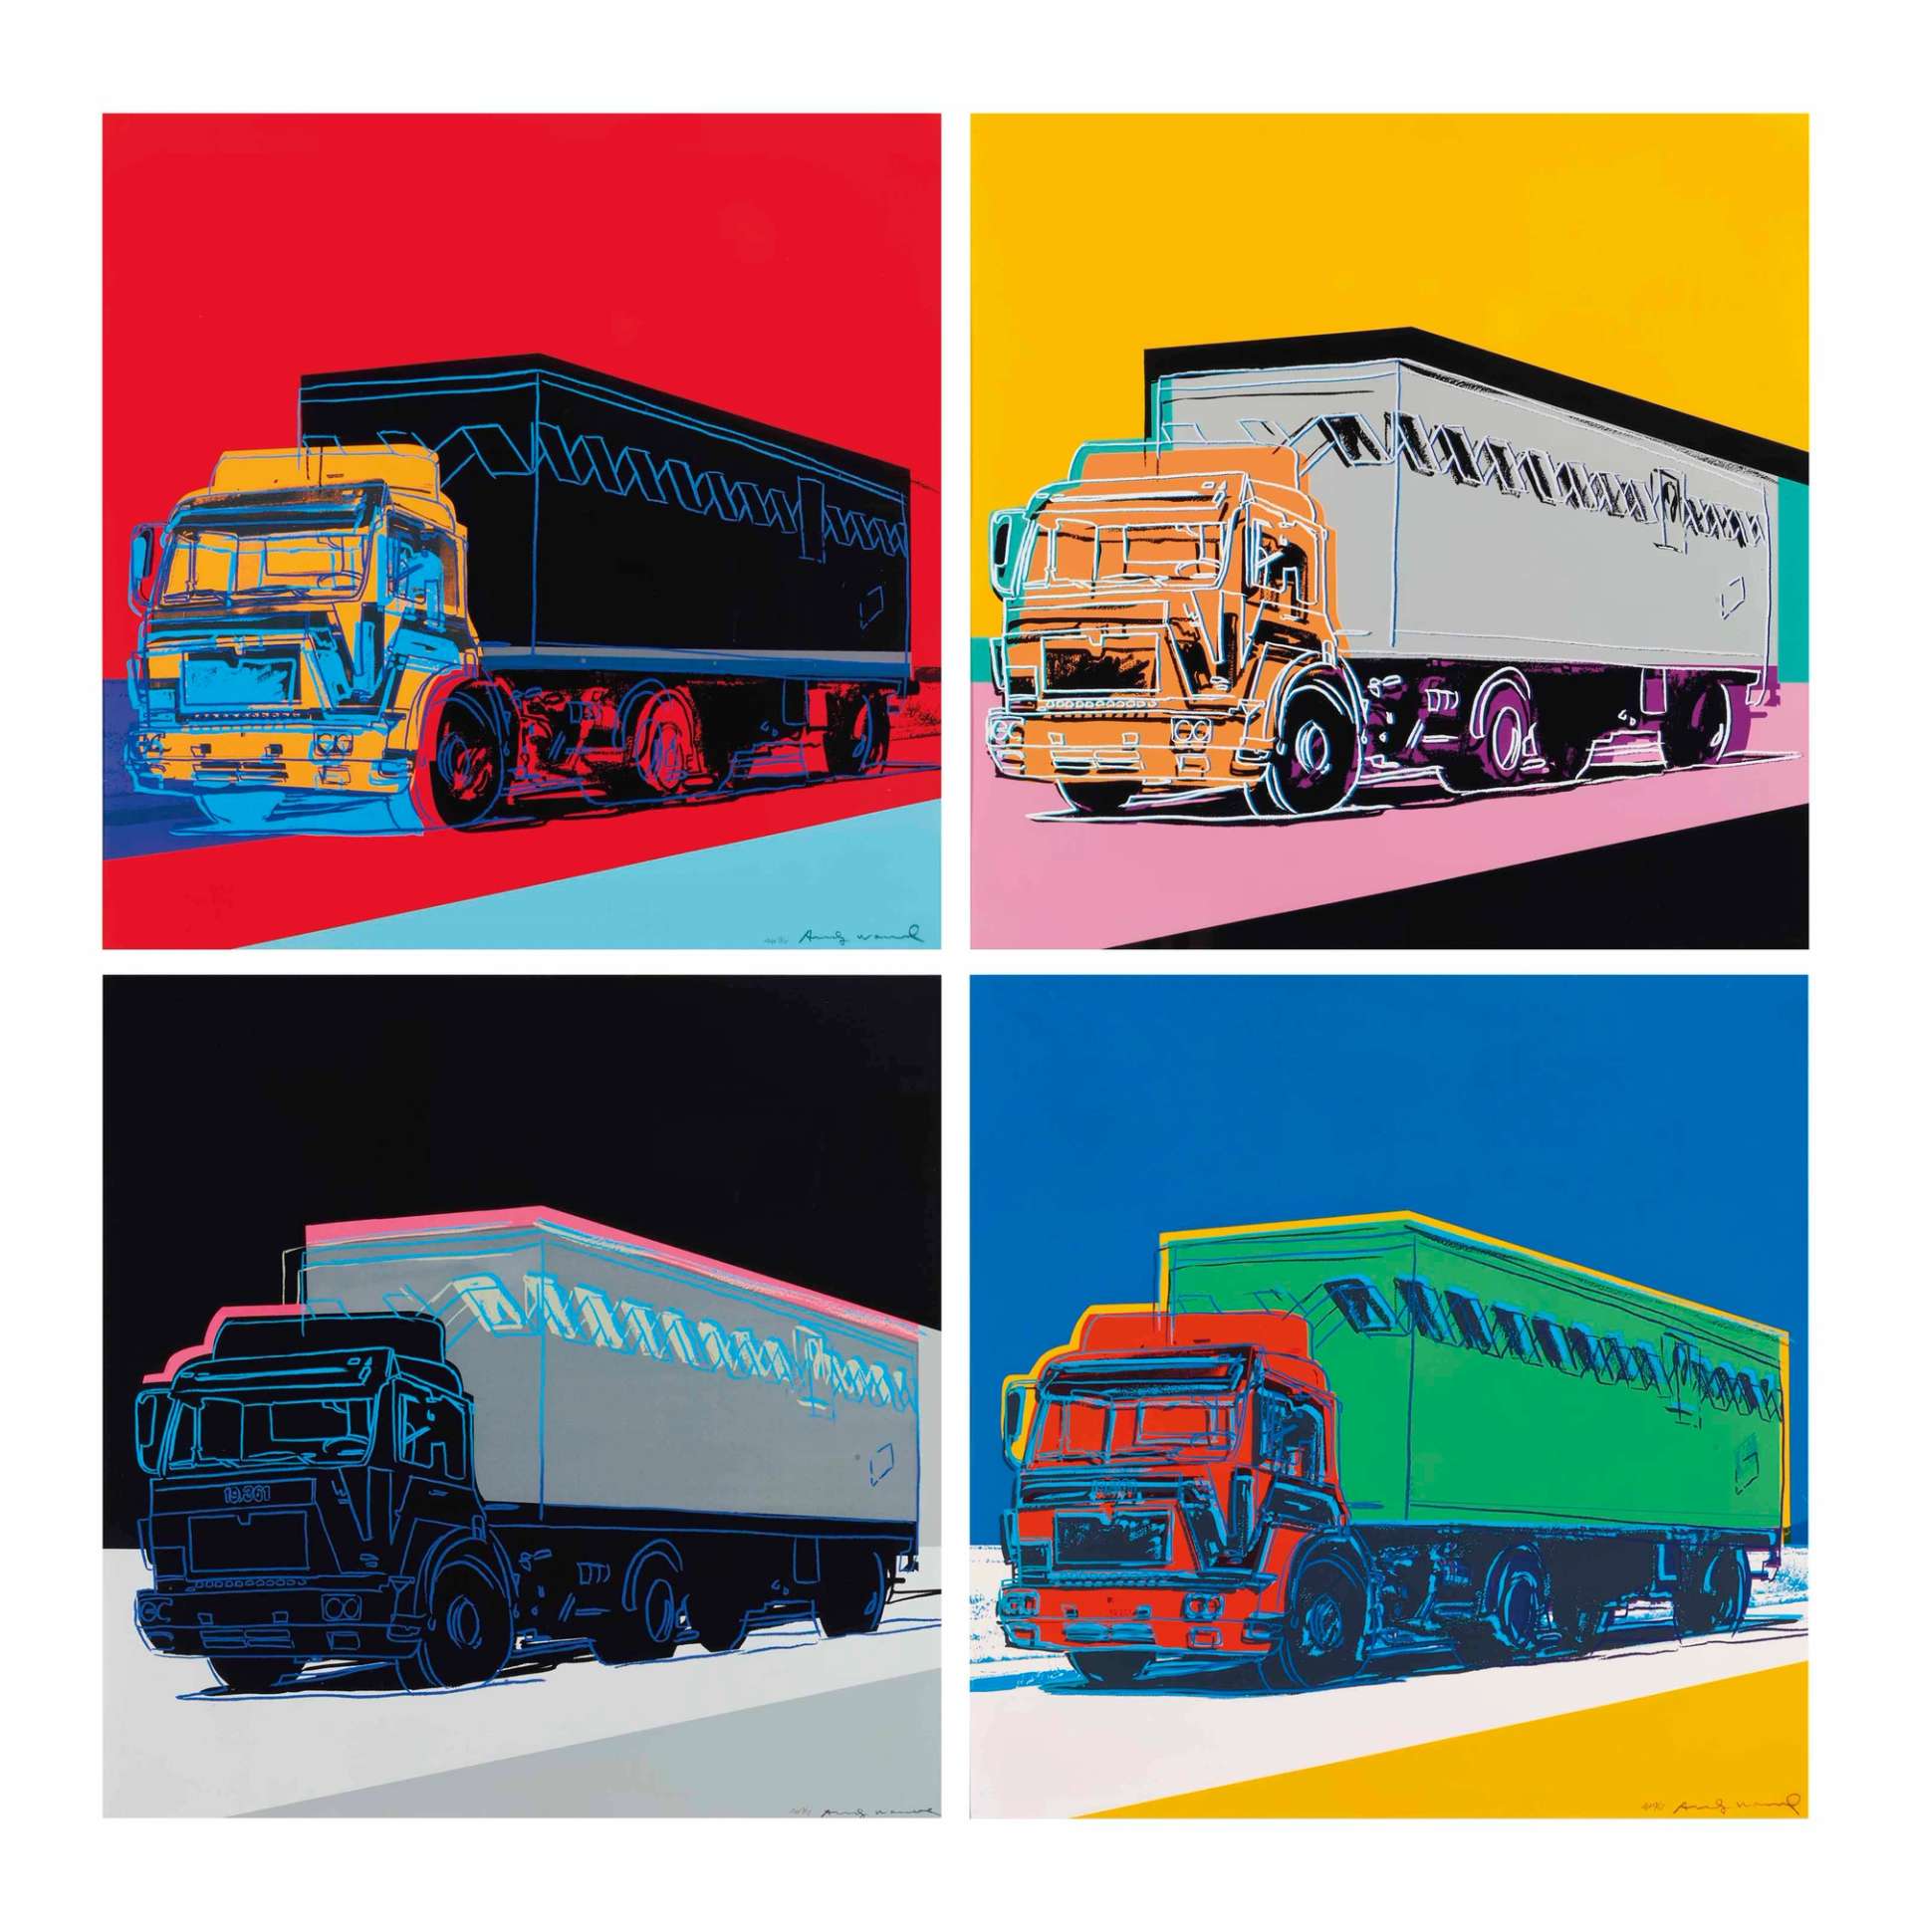 10 Facts About Andy Warhol's Trucks